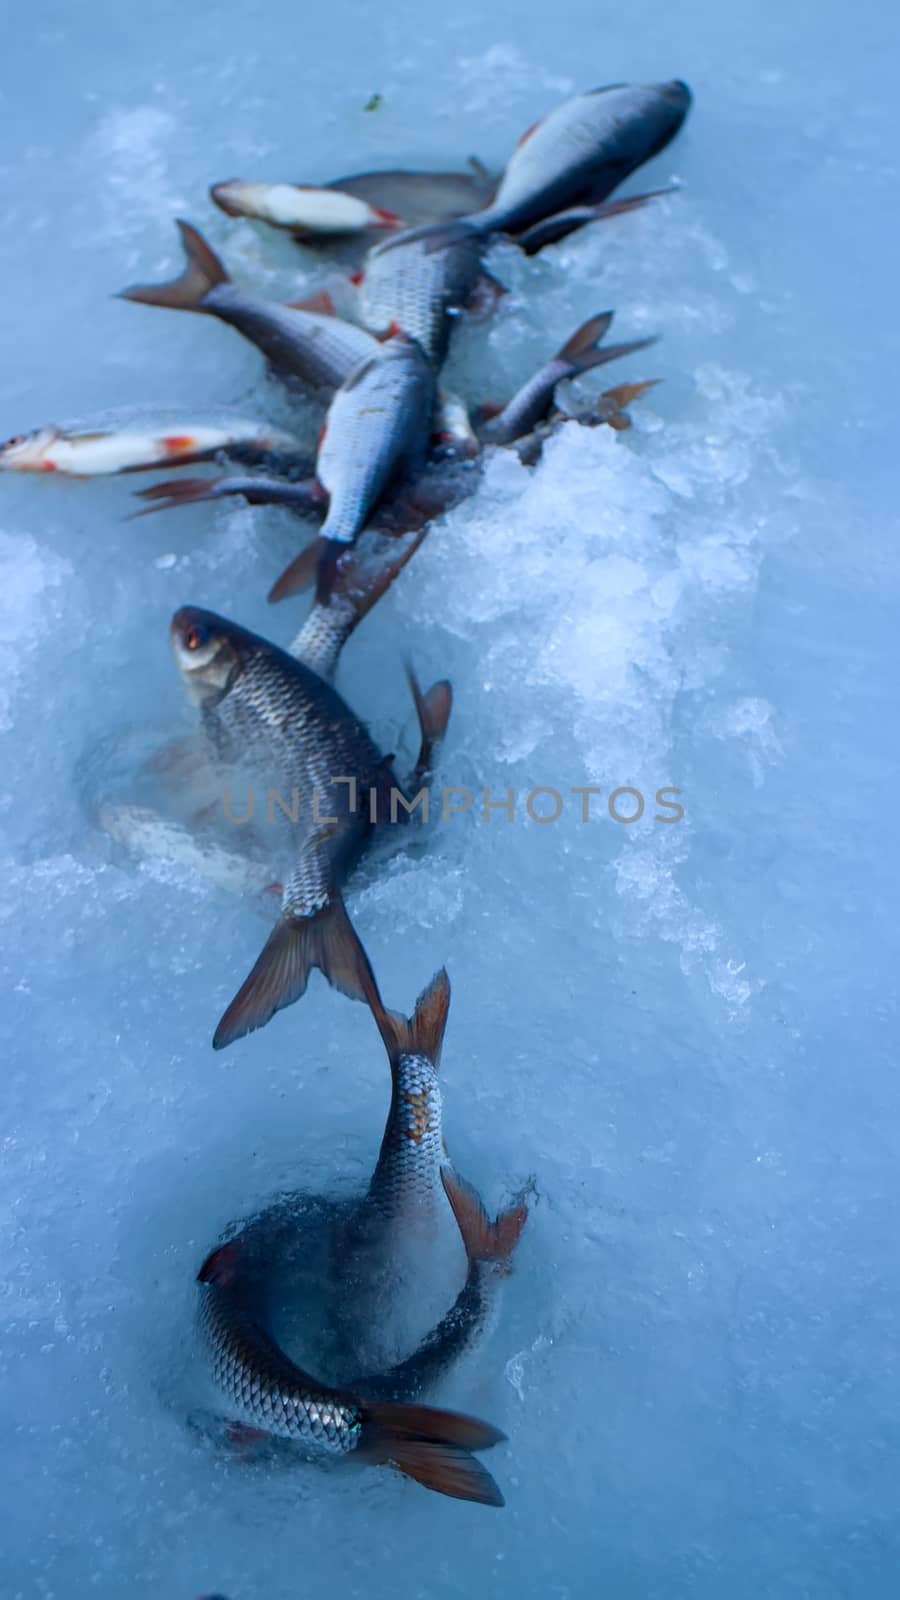 Freshly caught fish on ice in a very windy day by max51288